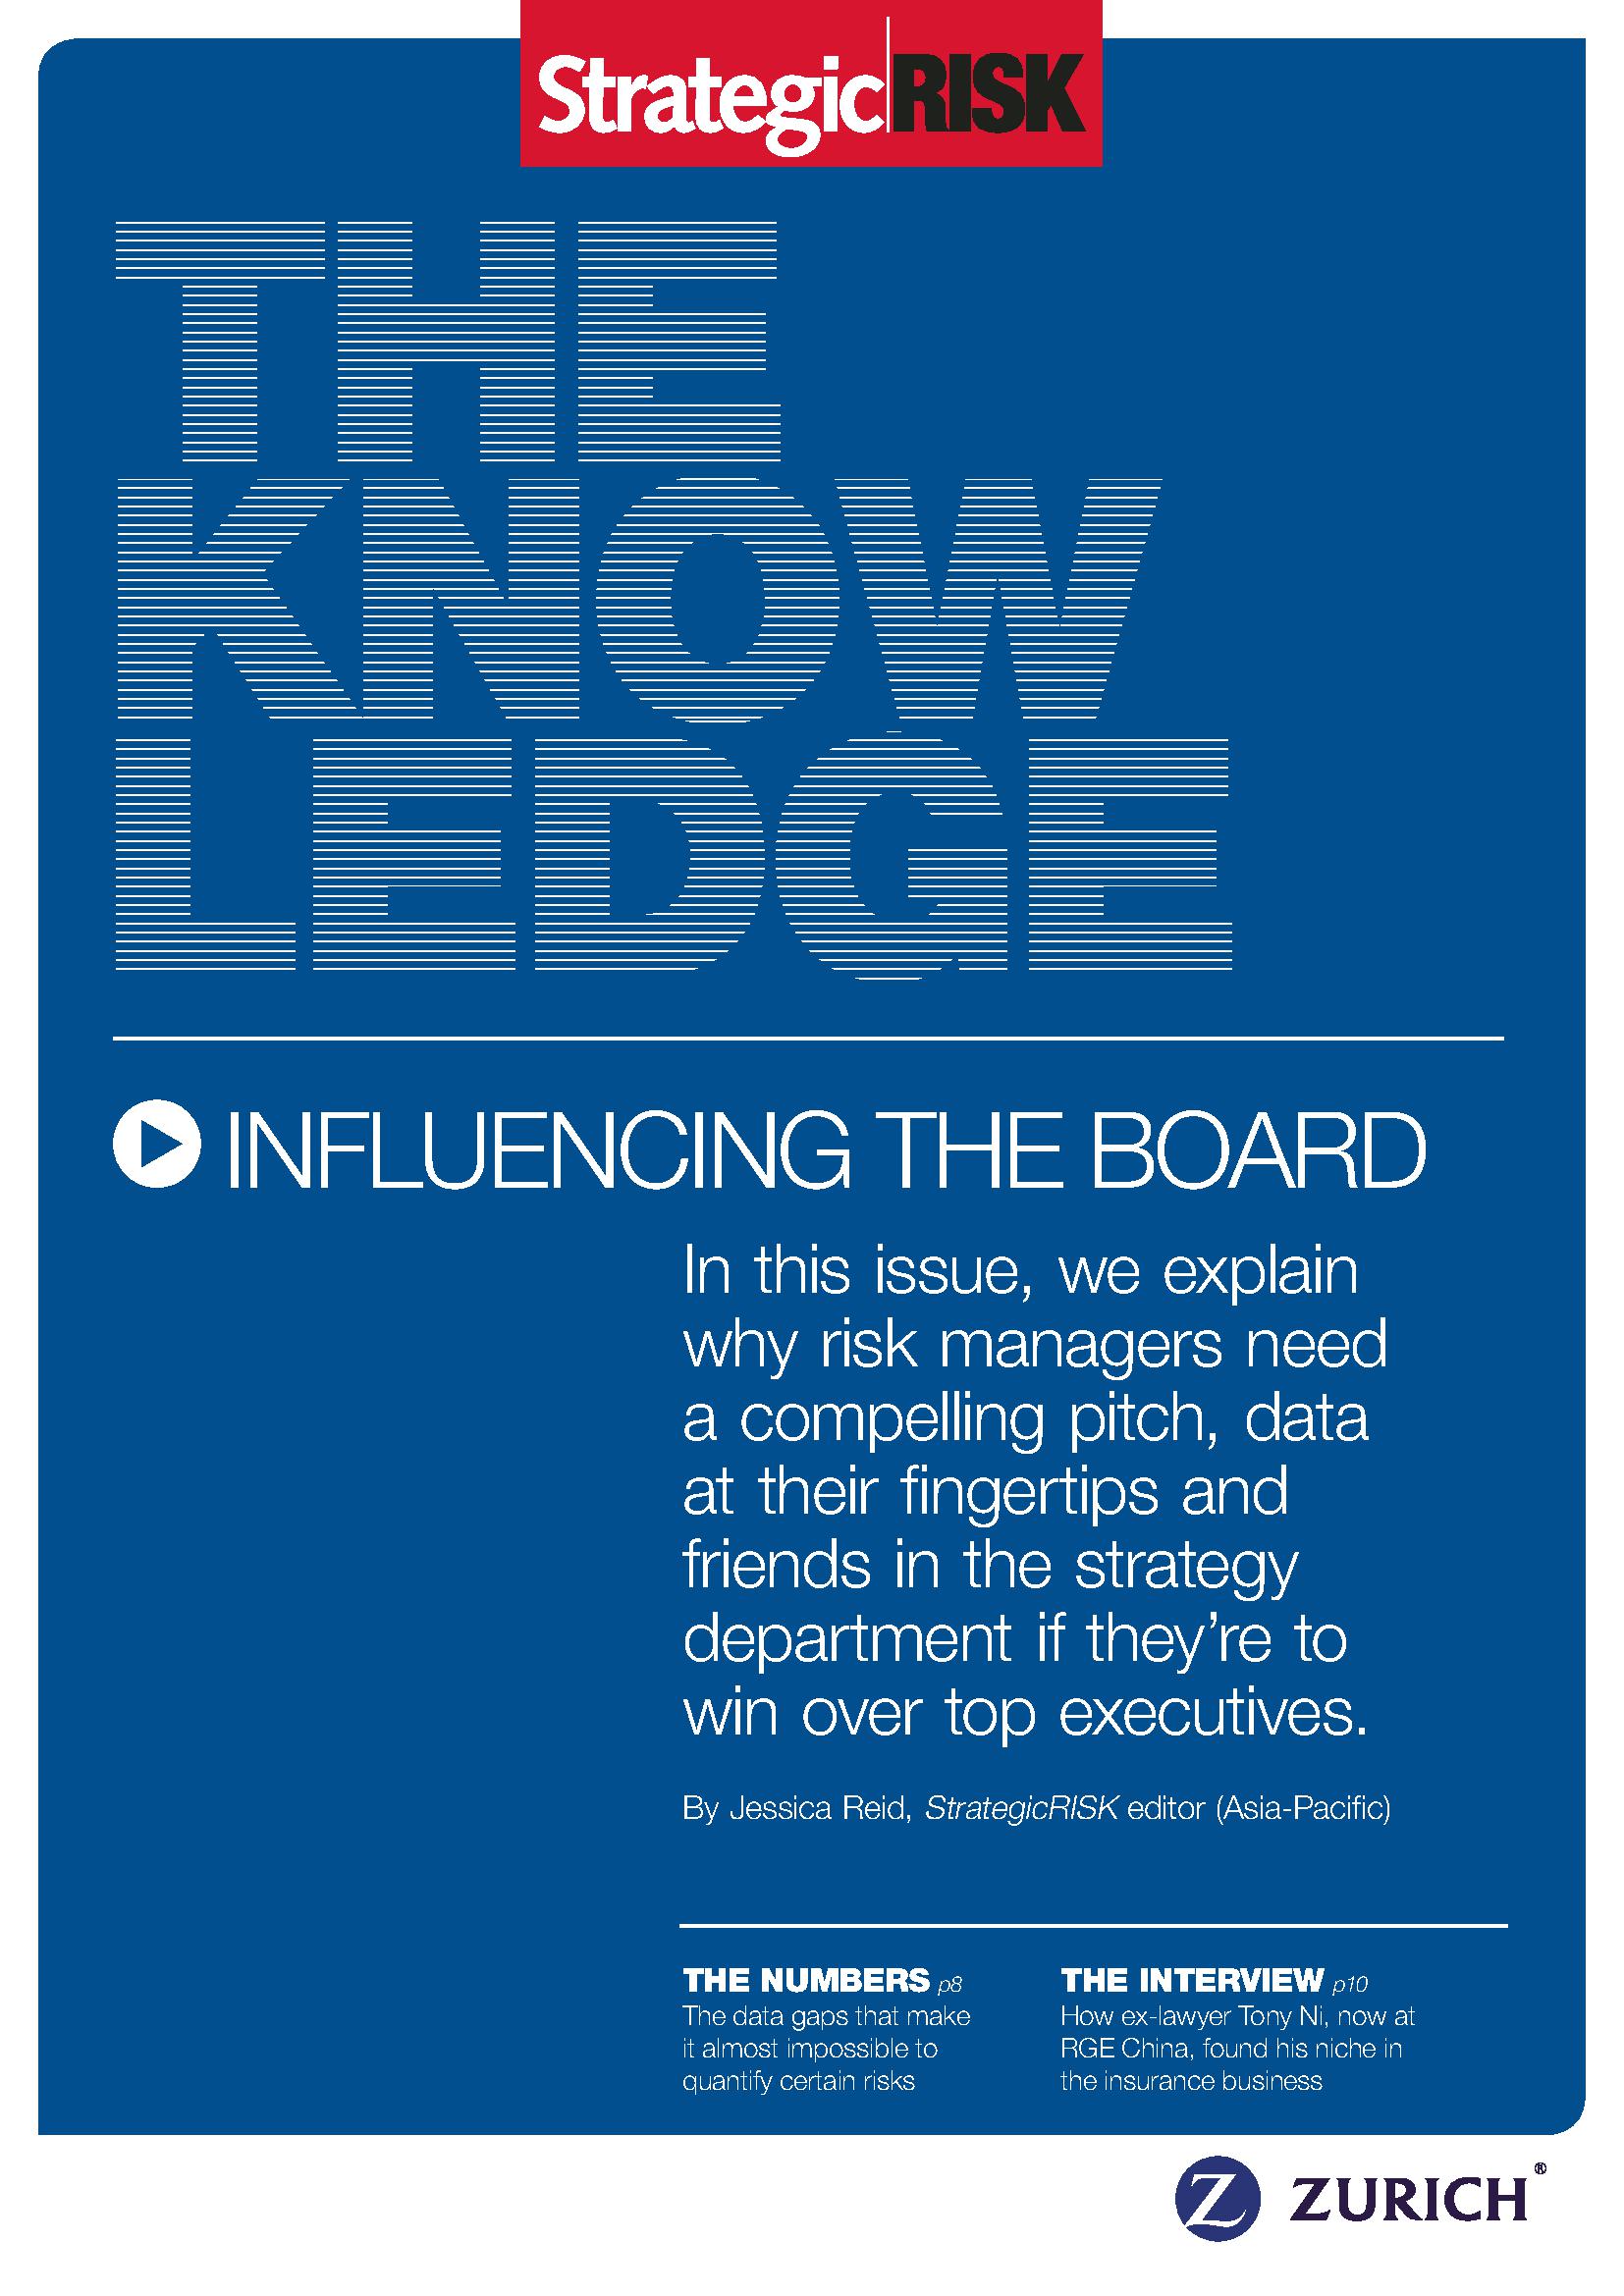 The Knowledge Report: Influencing the Board